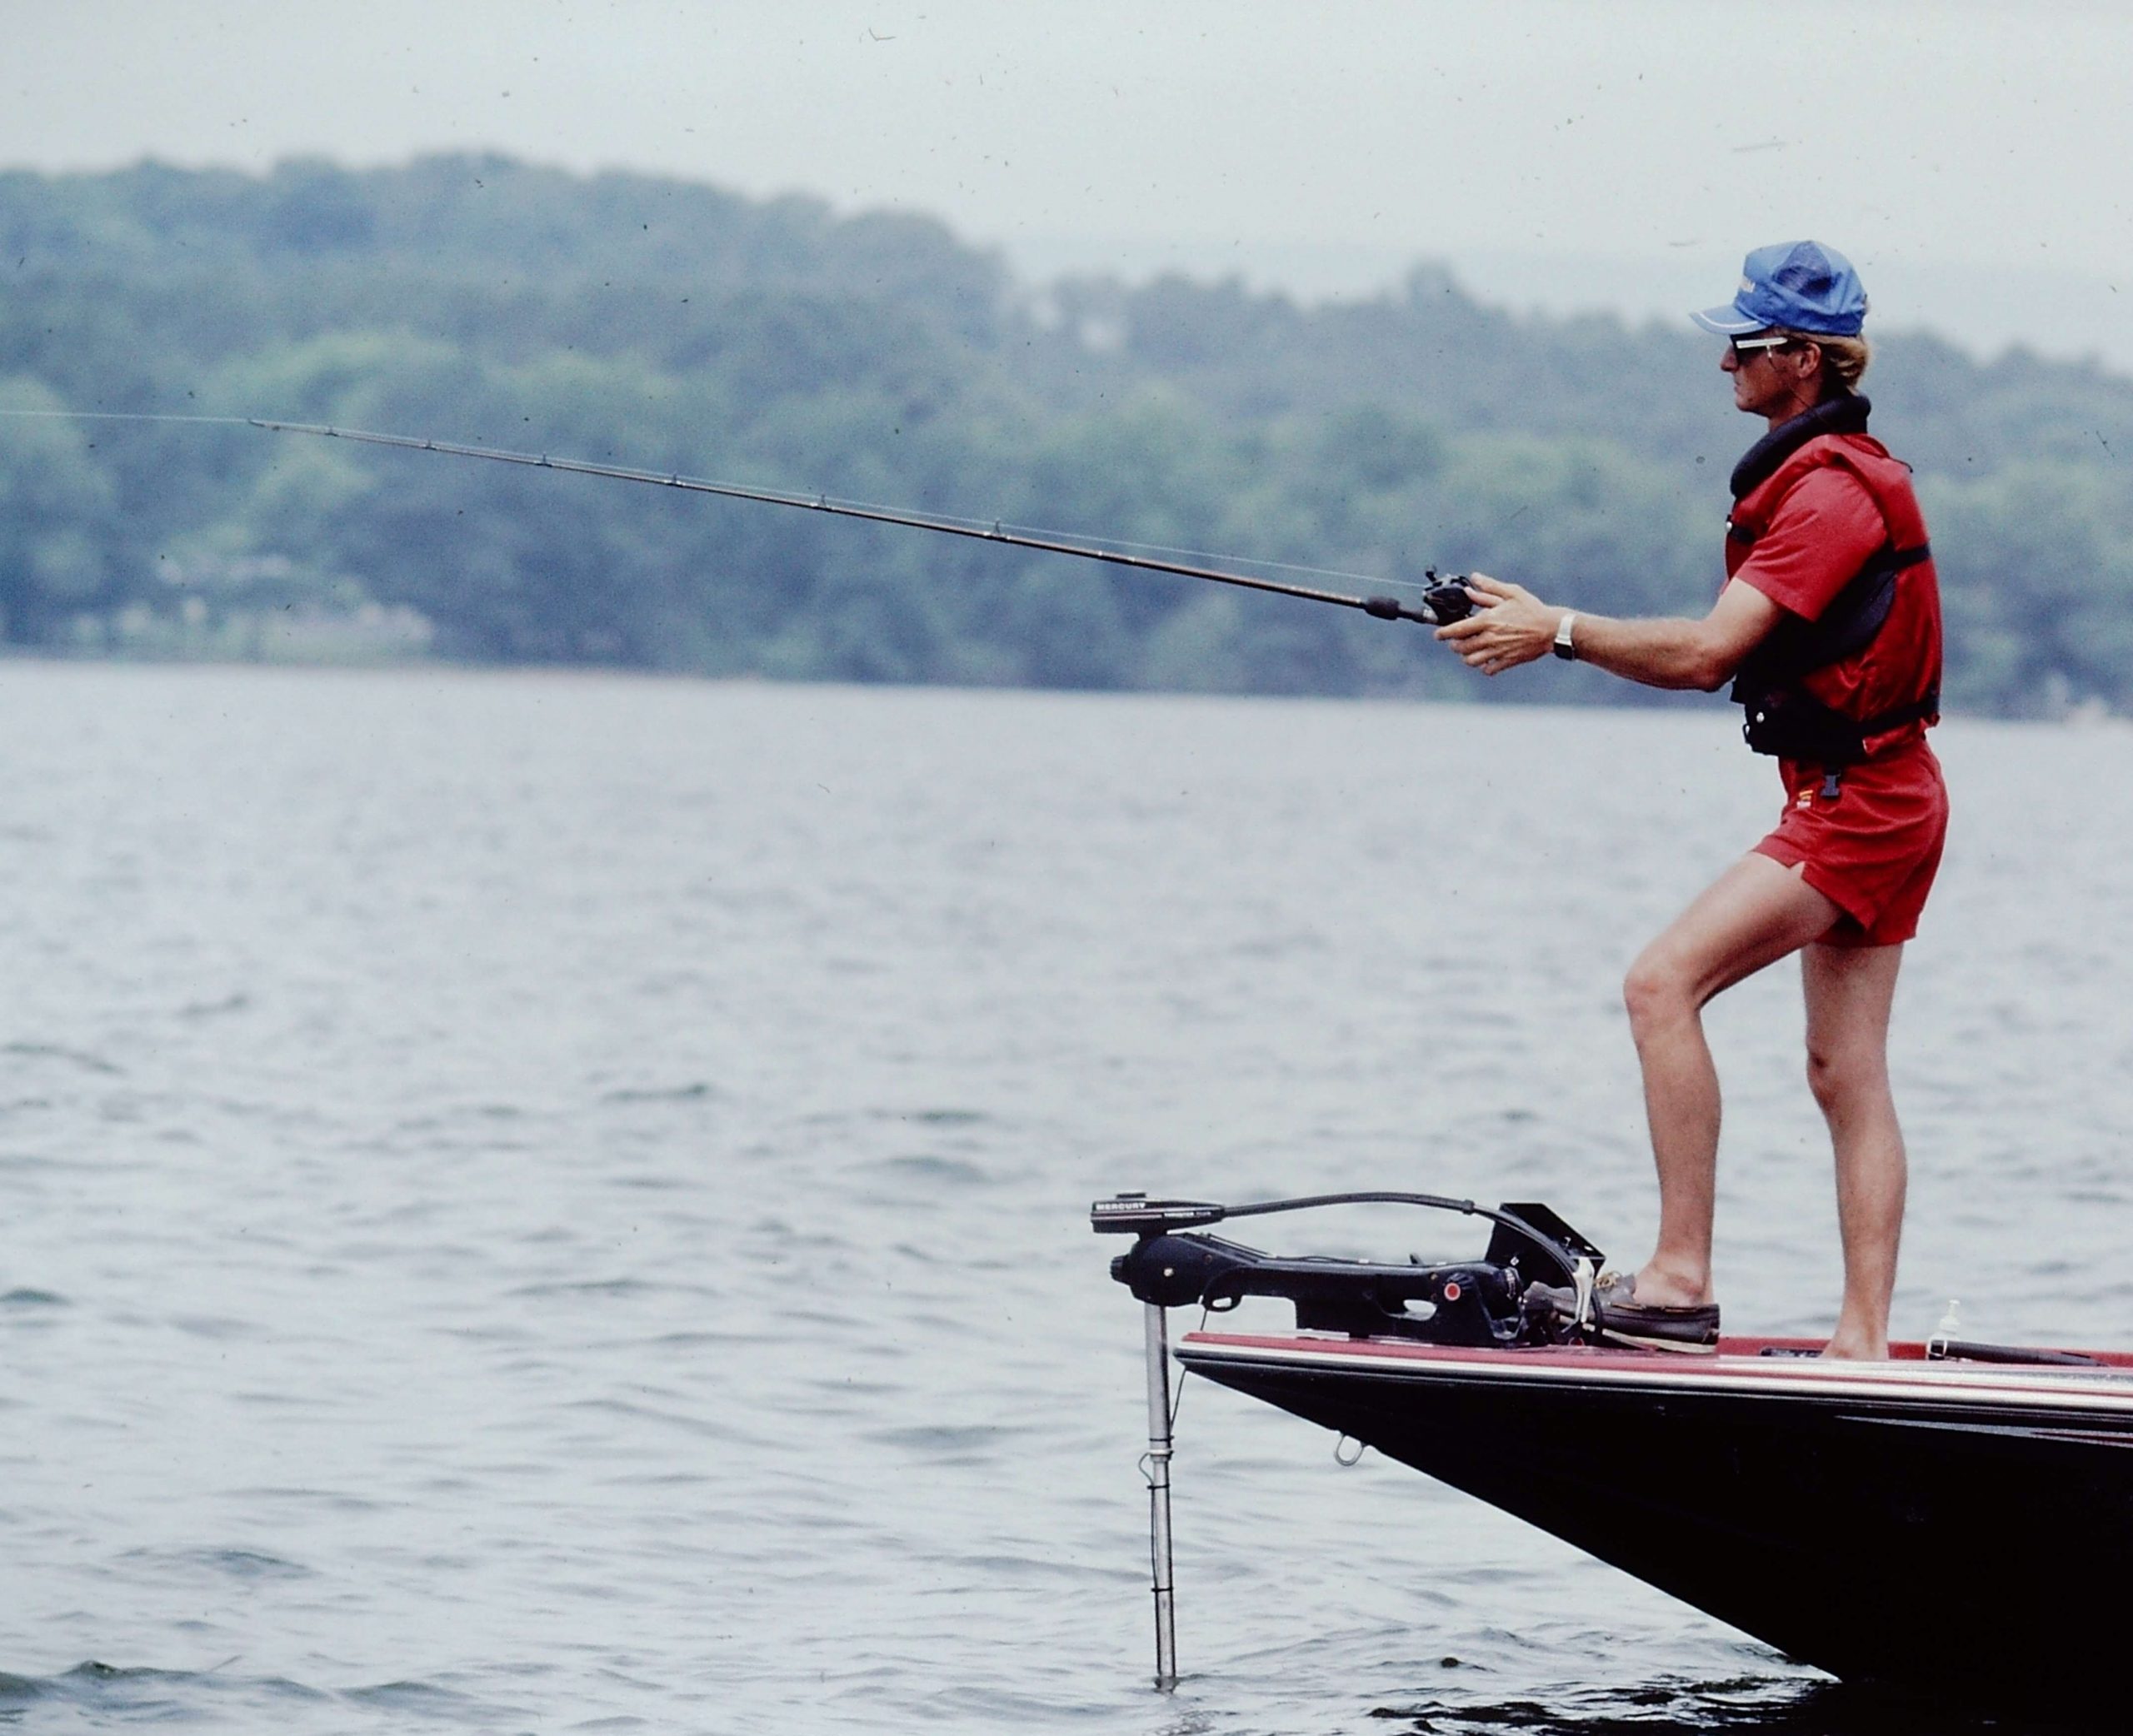 Another competitor in the 1986 event who will also compete in BASSfest is Gary Klein, who finished in a less-than-spectacular 104th place. Rick Clunn, who finished in sixth place with 33-15 in 1986, will also be among the pros in the 2014 tournament.